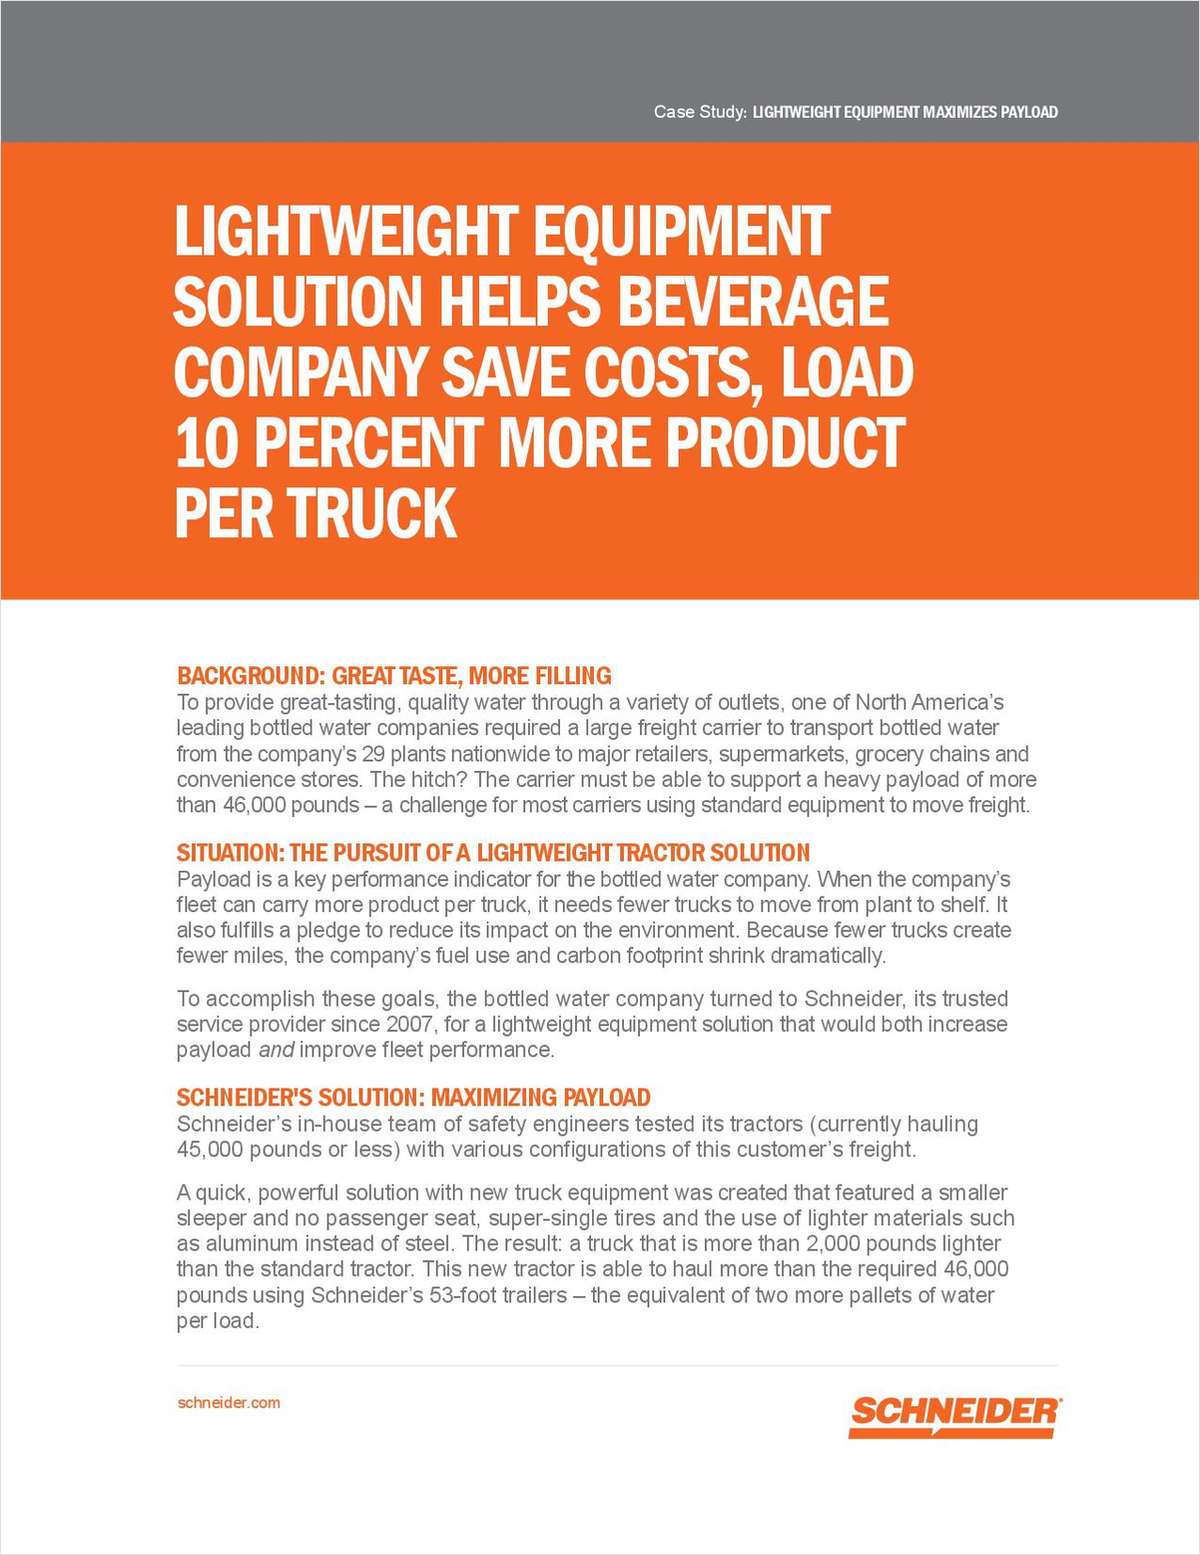 Maximize Efficiency With 10% More Payload Per Trailer